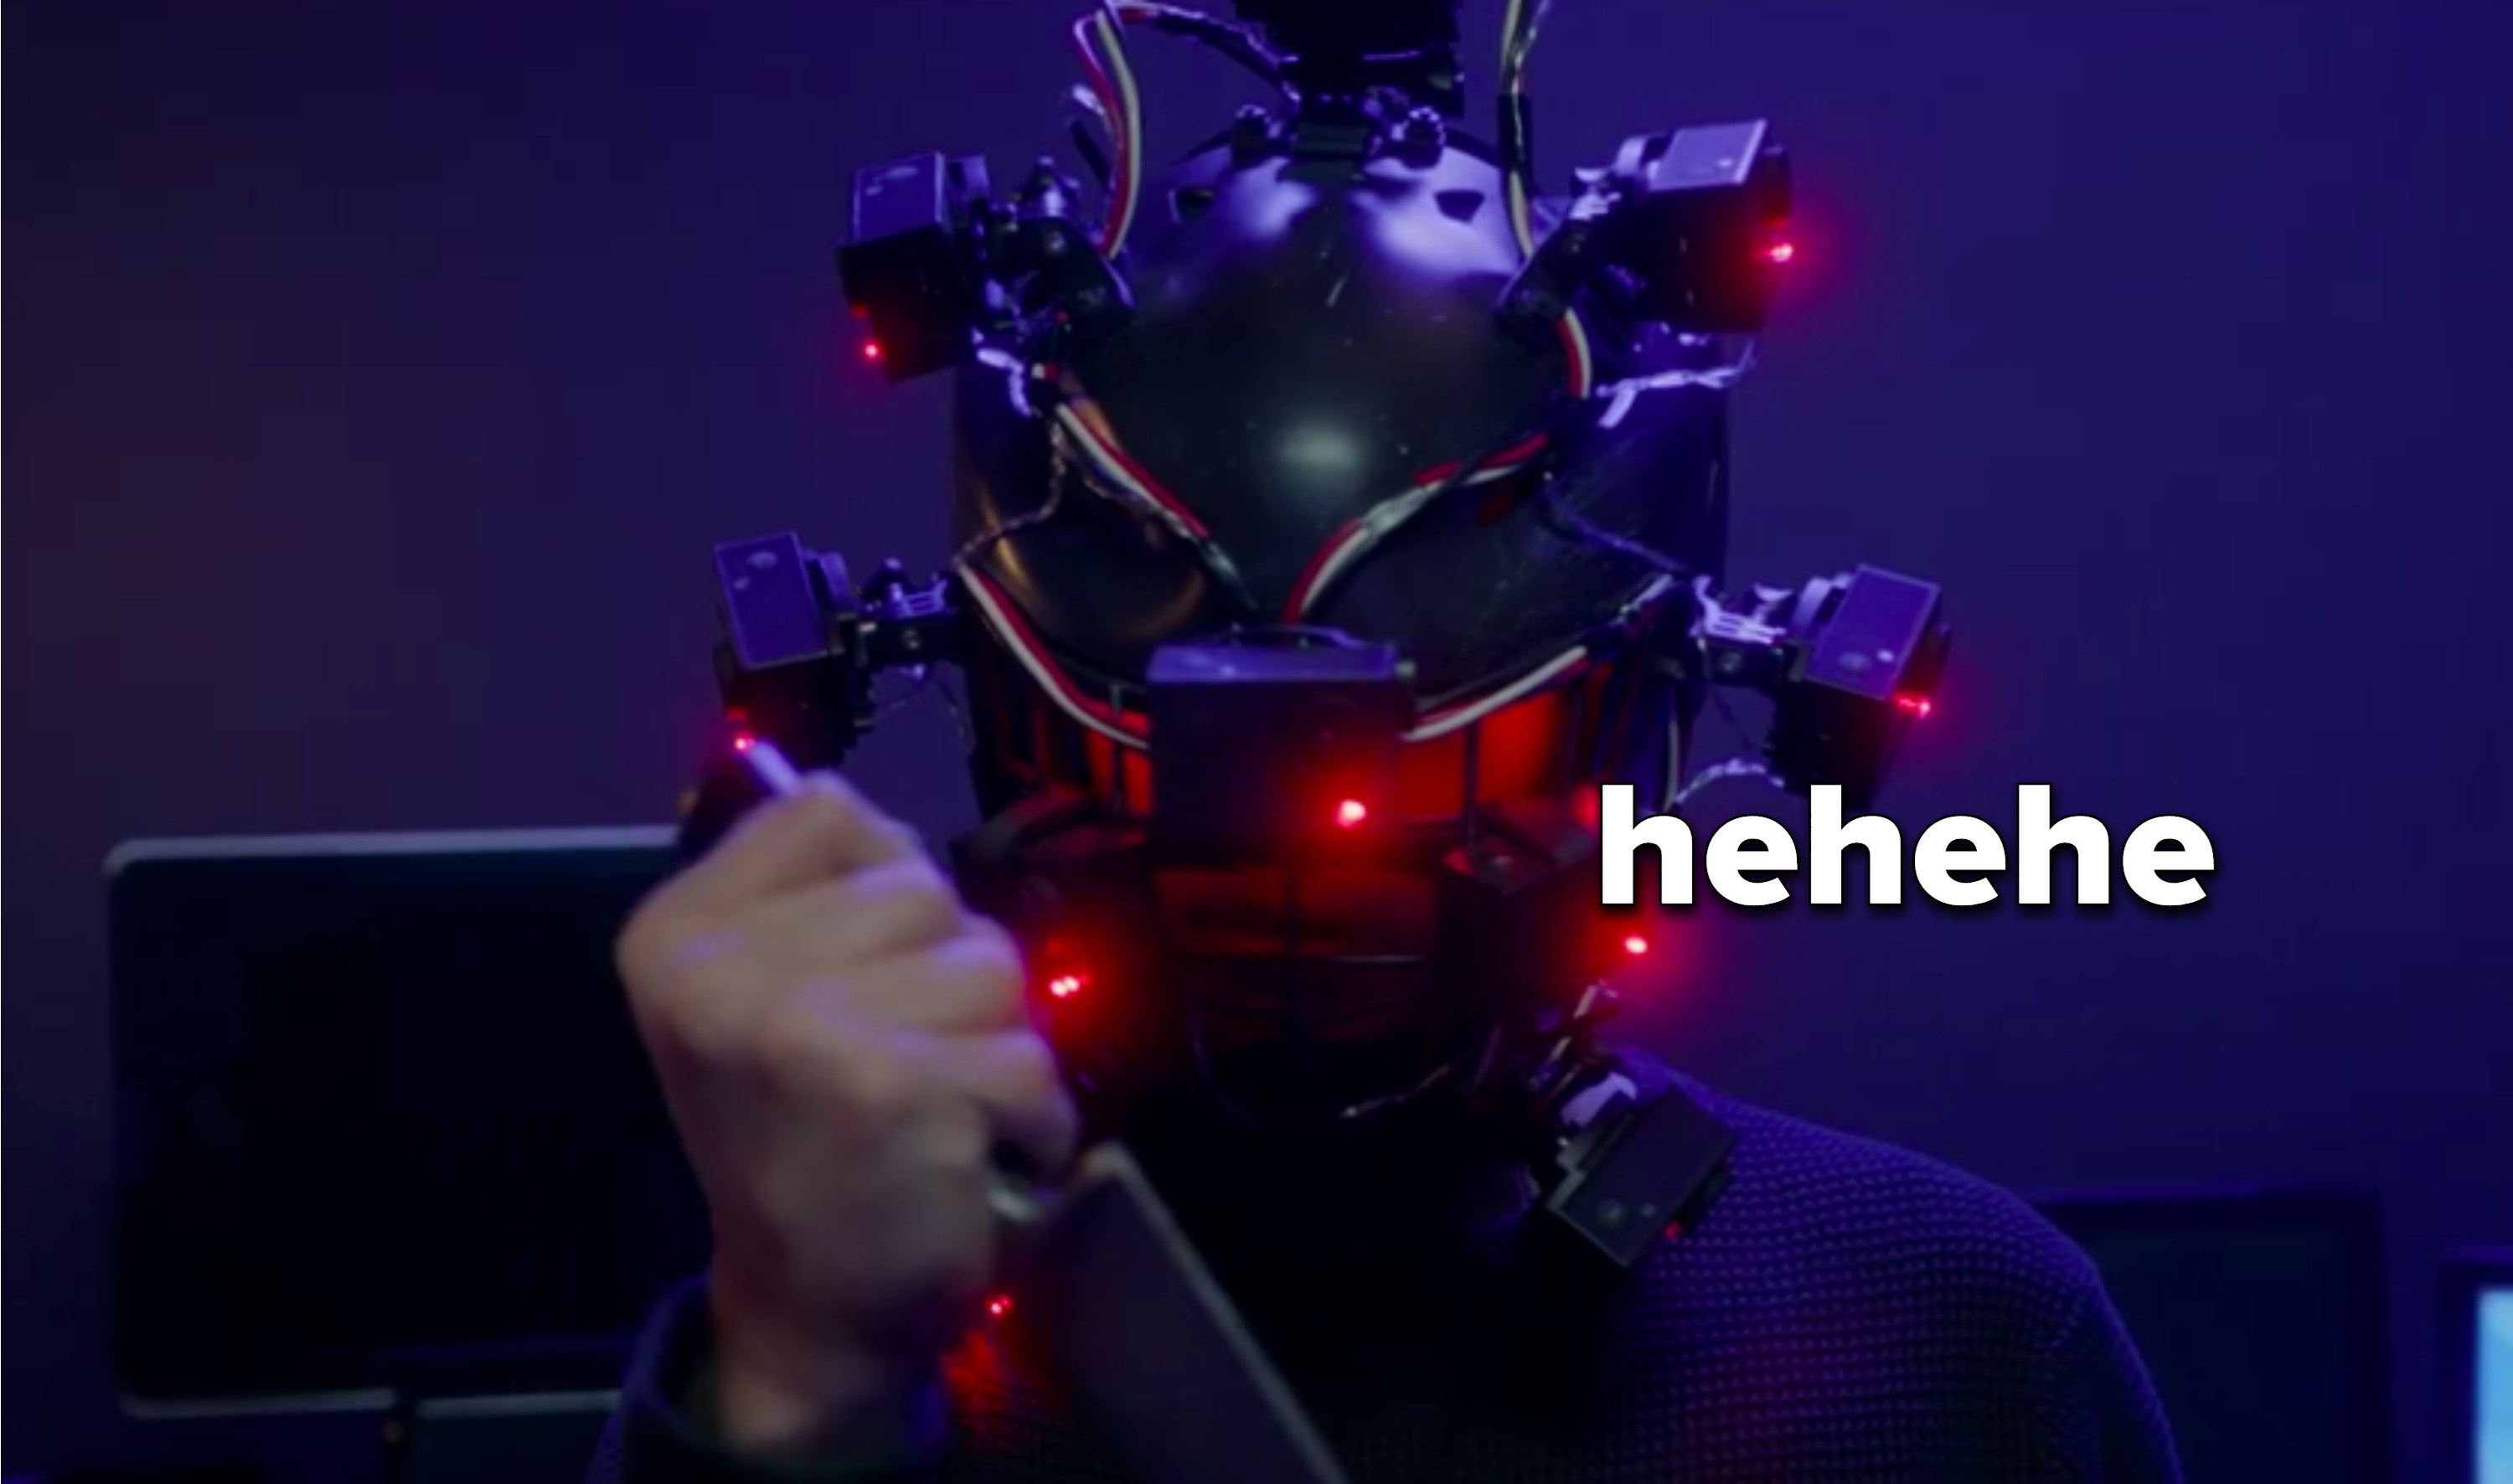 Brad wielding knife while wearing giant scary VR helmet, captioned, &quot;hehehe&quot;